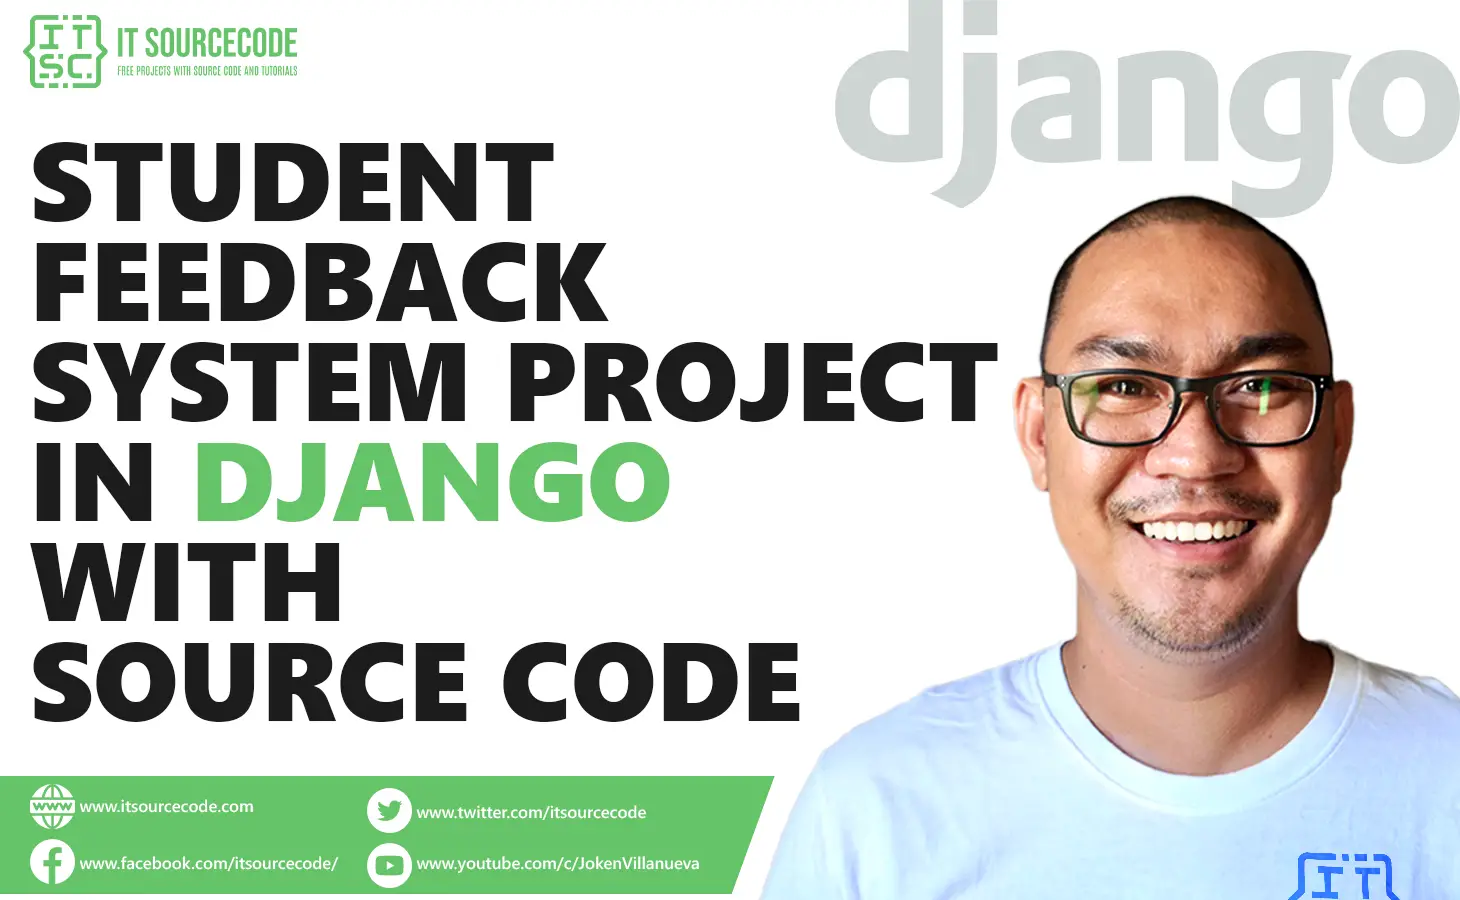 Student Feedback System Project in Django with Source Code